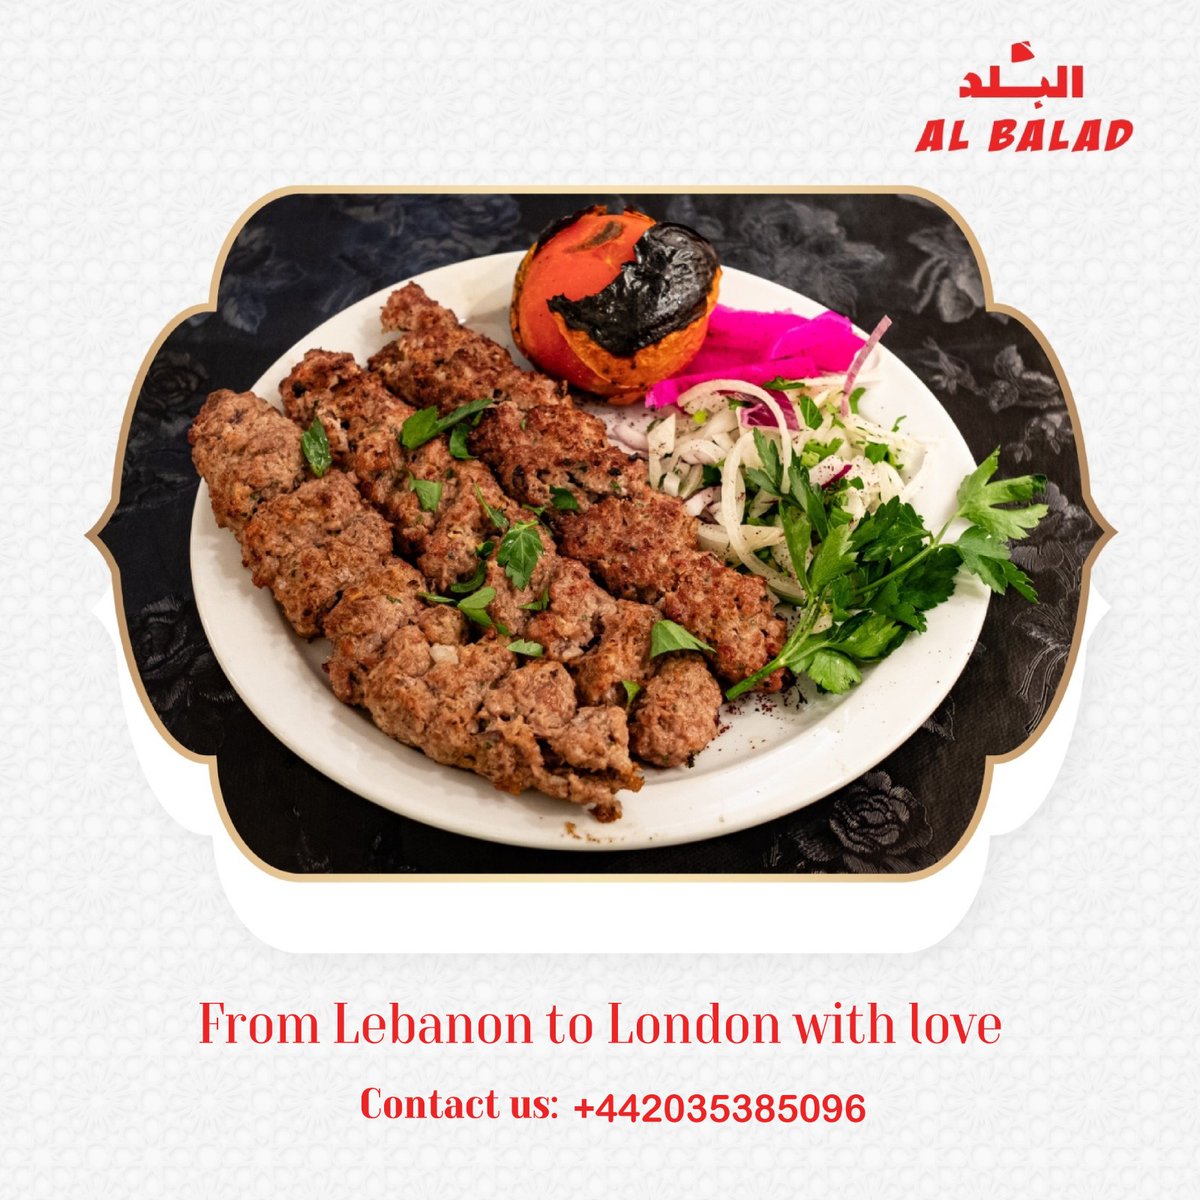 Nothing beats the taste of freshly grilled kafta meshwi.😋 have you tried it before? It’s a popular Lebanese dish, the perfect lunchtime main dish.🍽️ Come and try it with us! ❤️ 📌Free delivery 'From Lebanon to London with love'❤️ #lebaneserestaurant #lebanesecusiene #Topfood